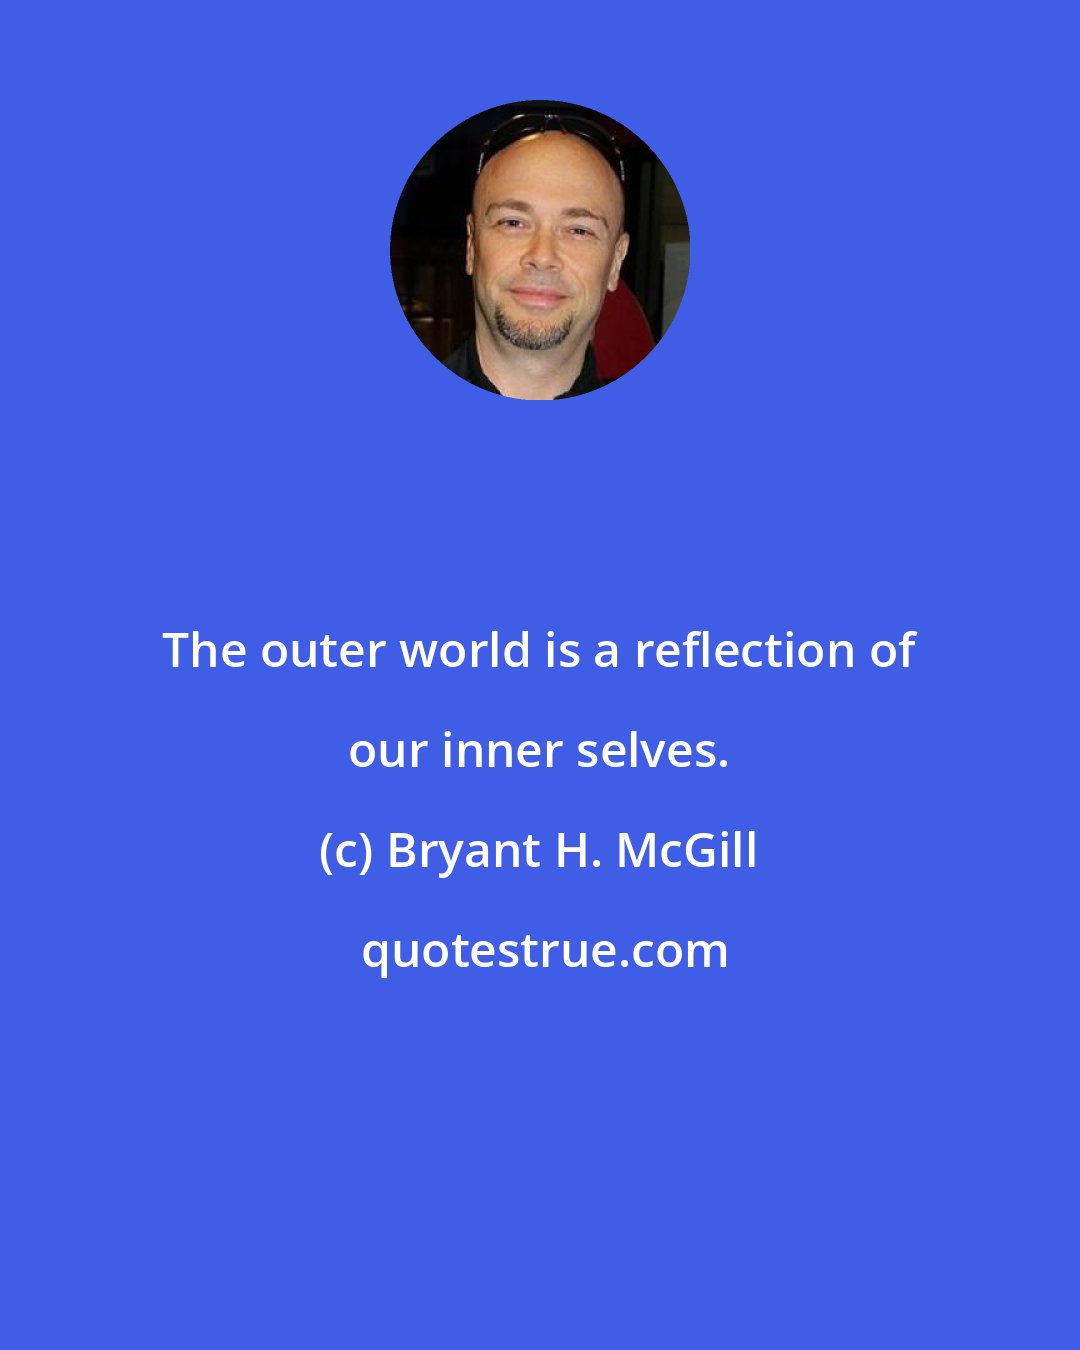 Bryant H. McGill: The outer world is a reflection of our inner selves.